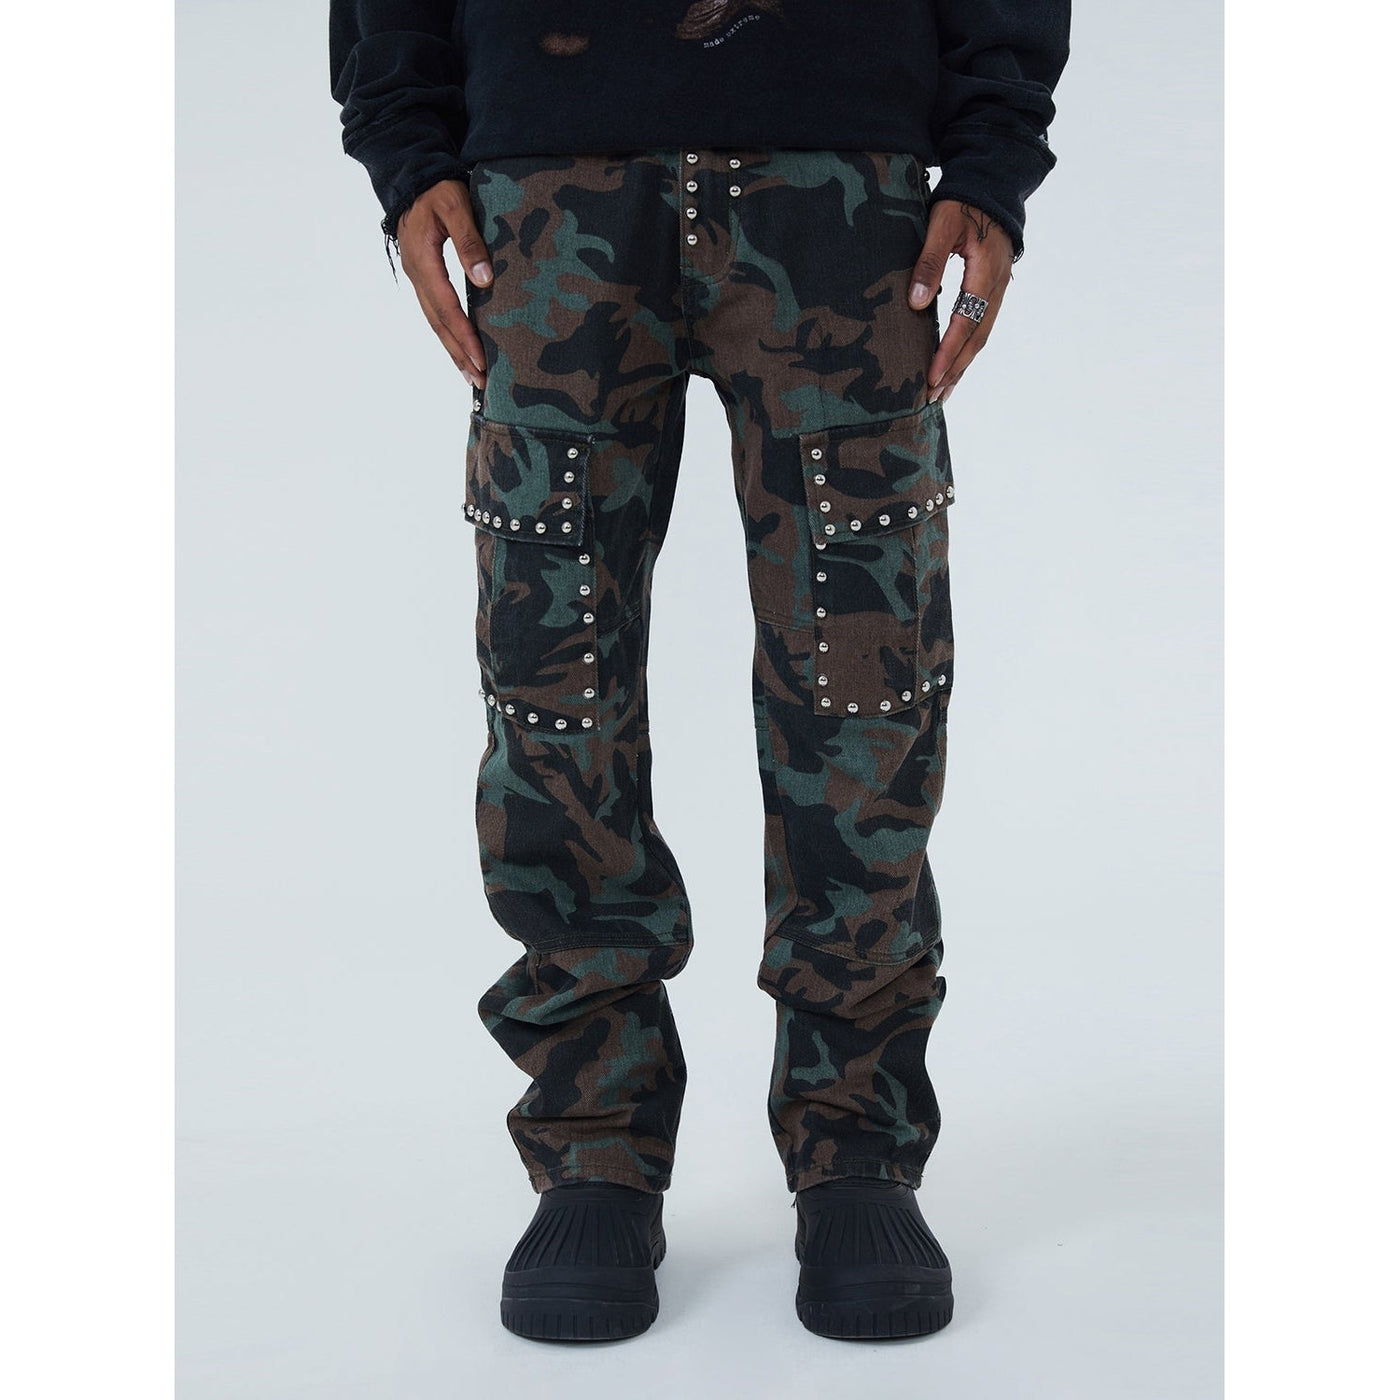 Studded Outline Camo Pants Korean Street Fashion Pants By Made Extreme Shop Online at OH Vault